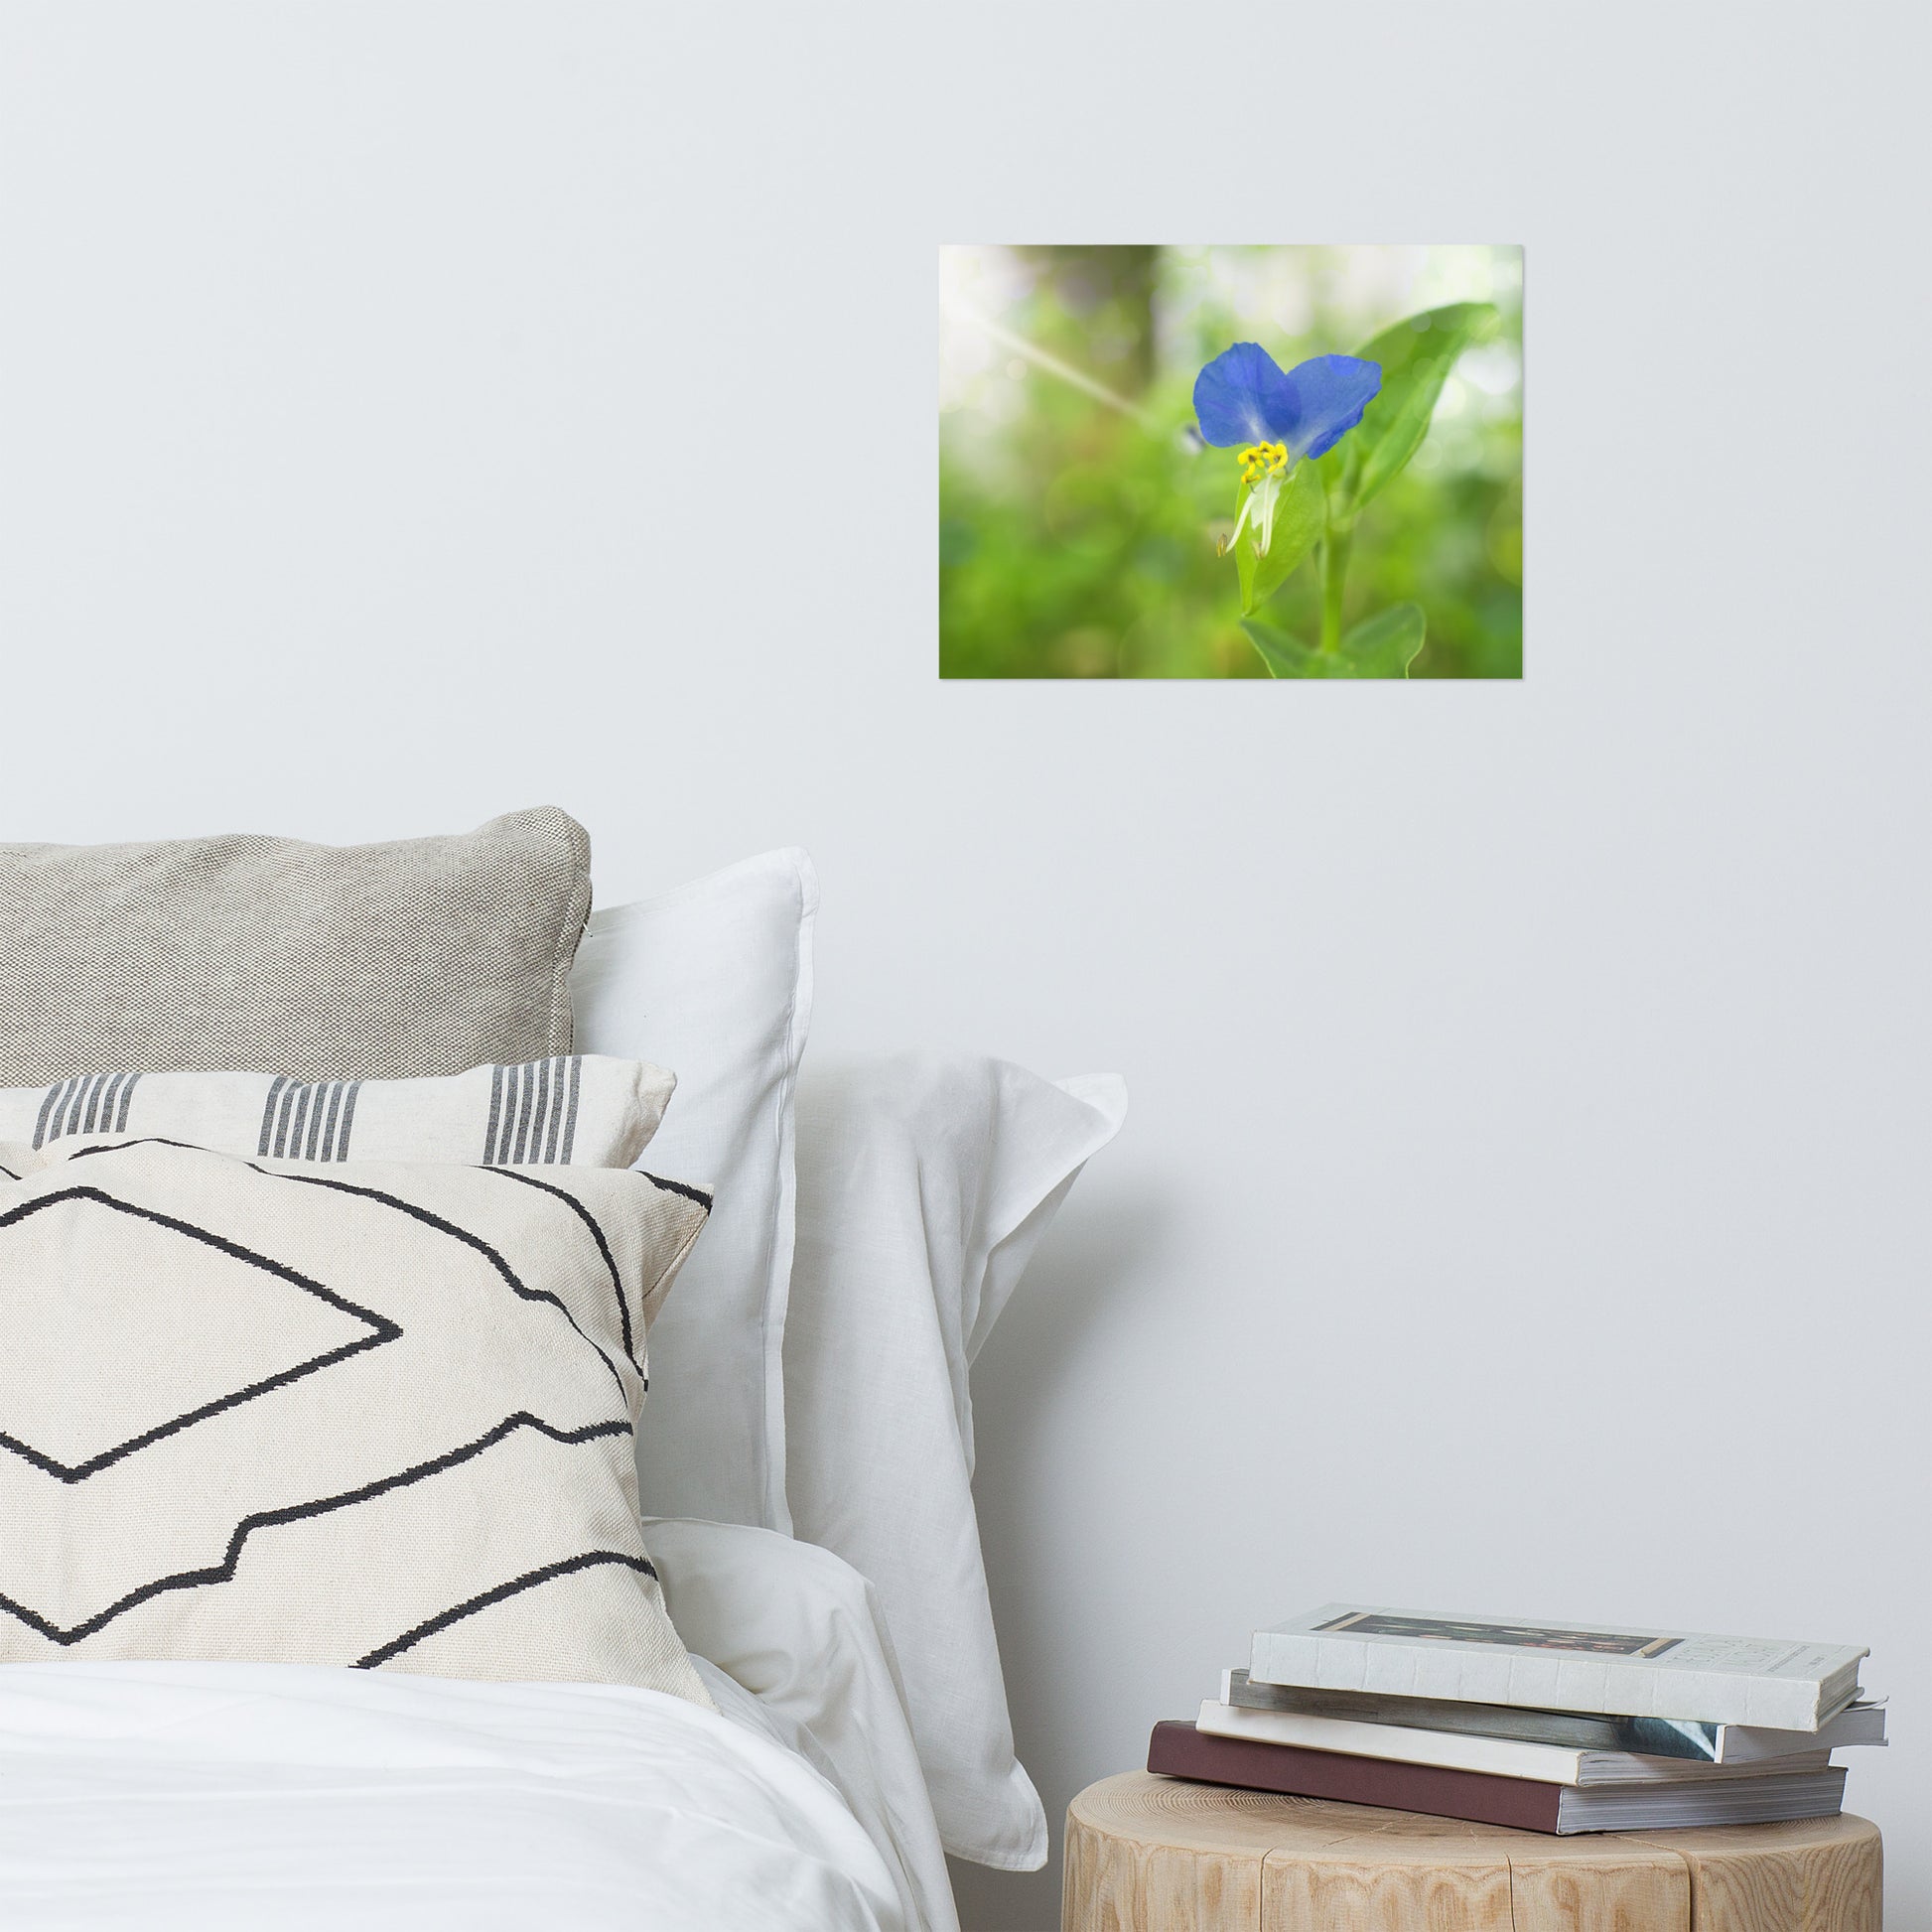 Floral Wall Posters: Little Purple and White Flower Bloom - Botanical / Floral / Flora / Flowers / Nature Photograph Loose / Unframed Wall Art Print - Artwork